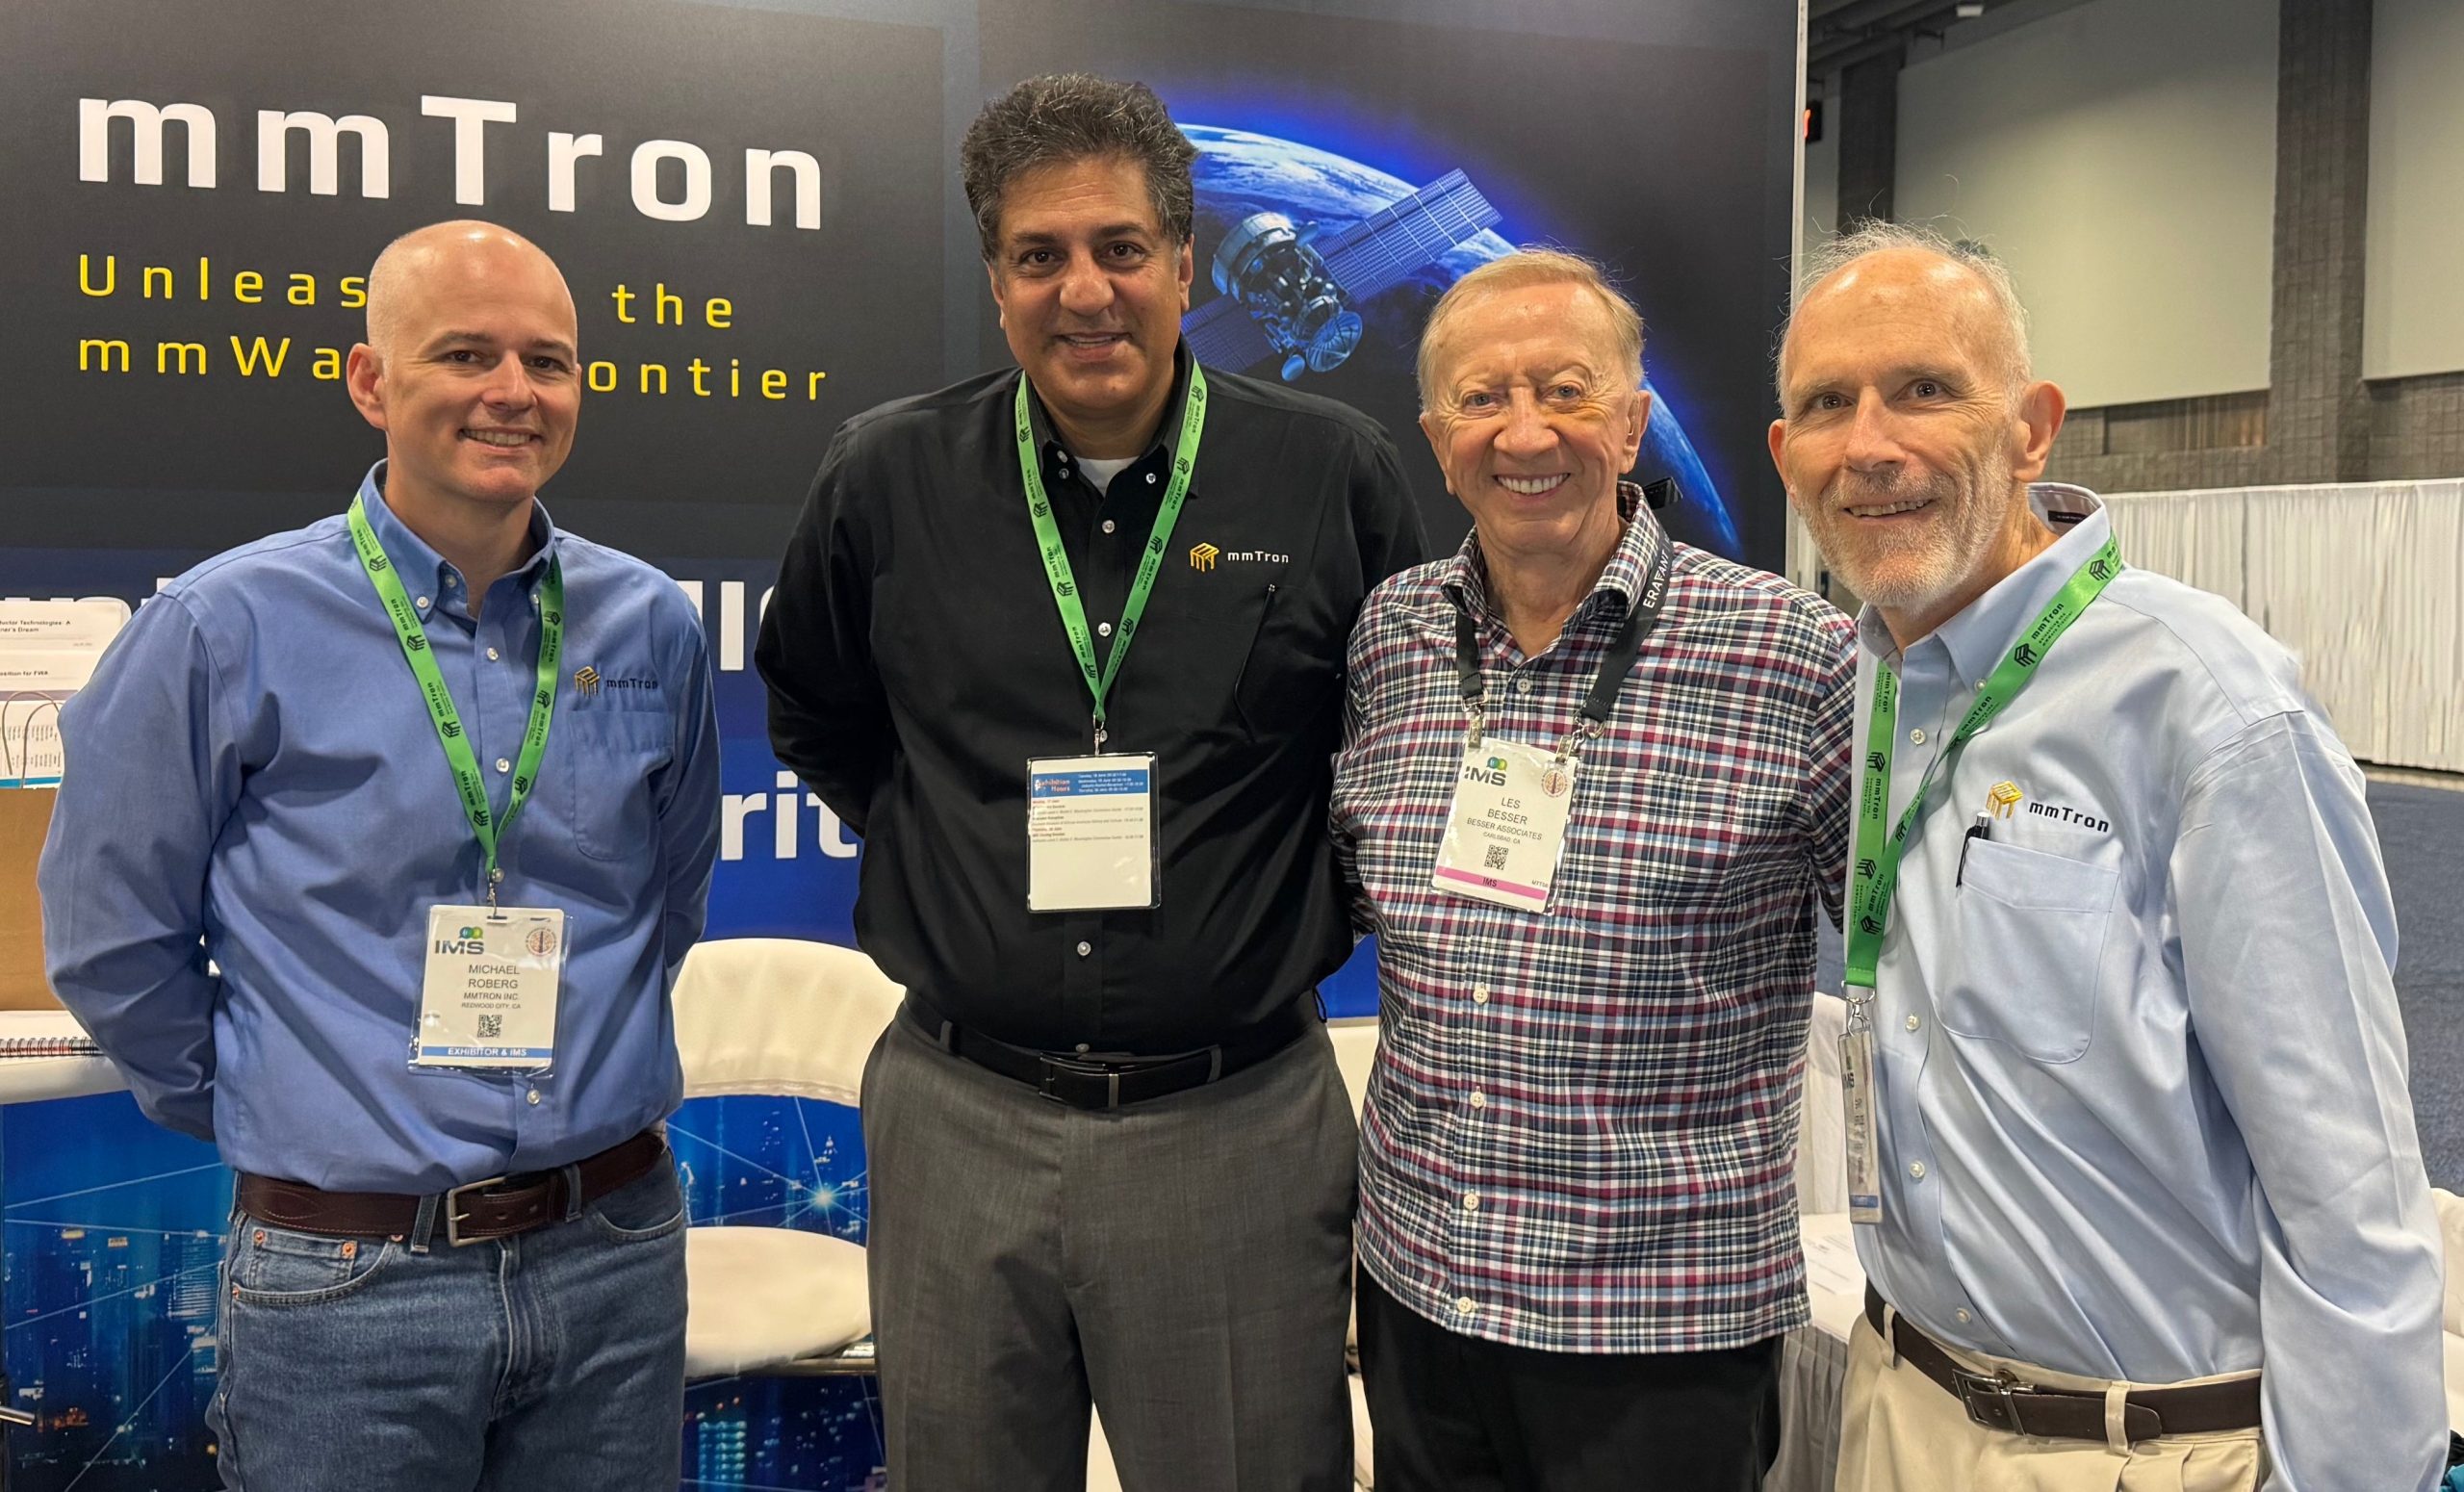 Les Besser in the mmTron booth with Mike Roberg, Seyed Tabatabaei, and Gary Lerude